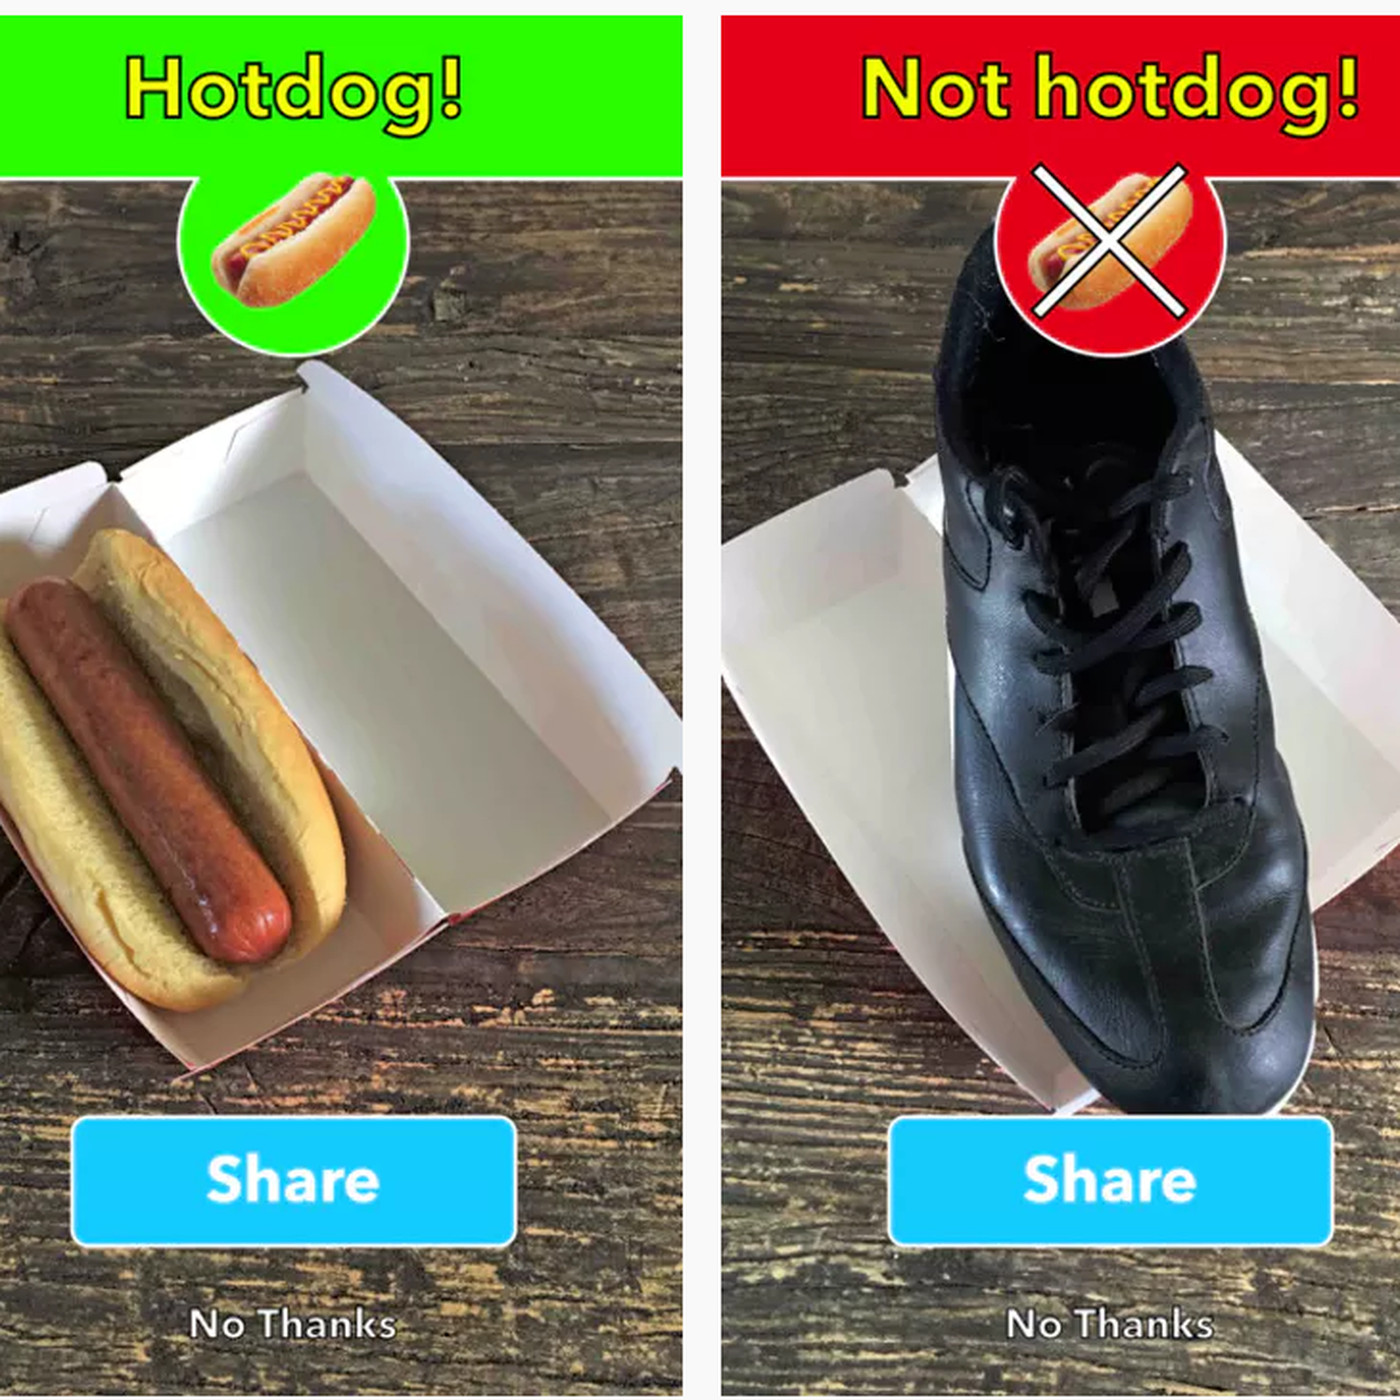 Screenshot from popular hot dog not a hot dog app from HBO's Silicon Valley